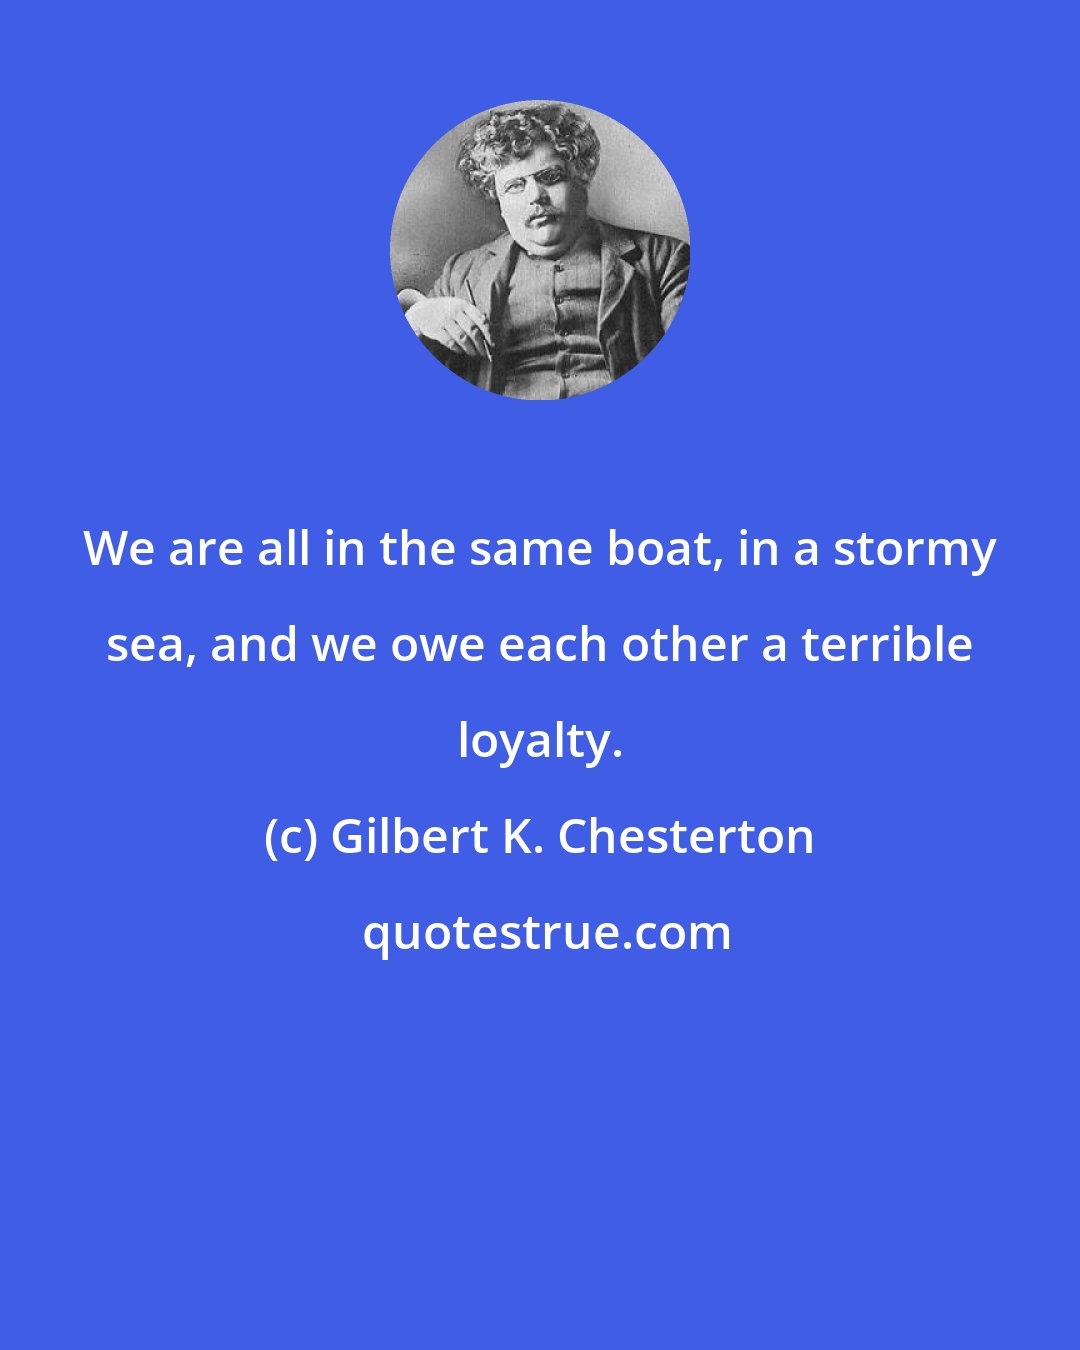 Gilbert K. Chesterton: We are all in the same boat, in a stormy sea, and we owe each other a terrible loyalty.